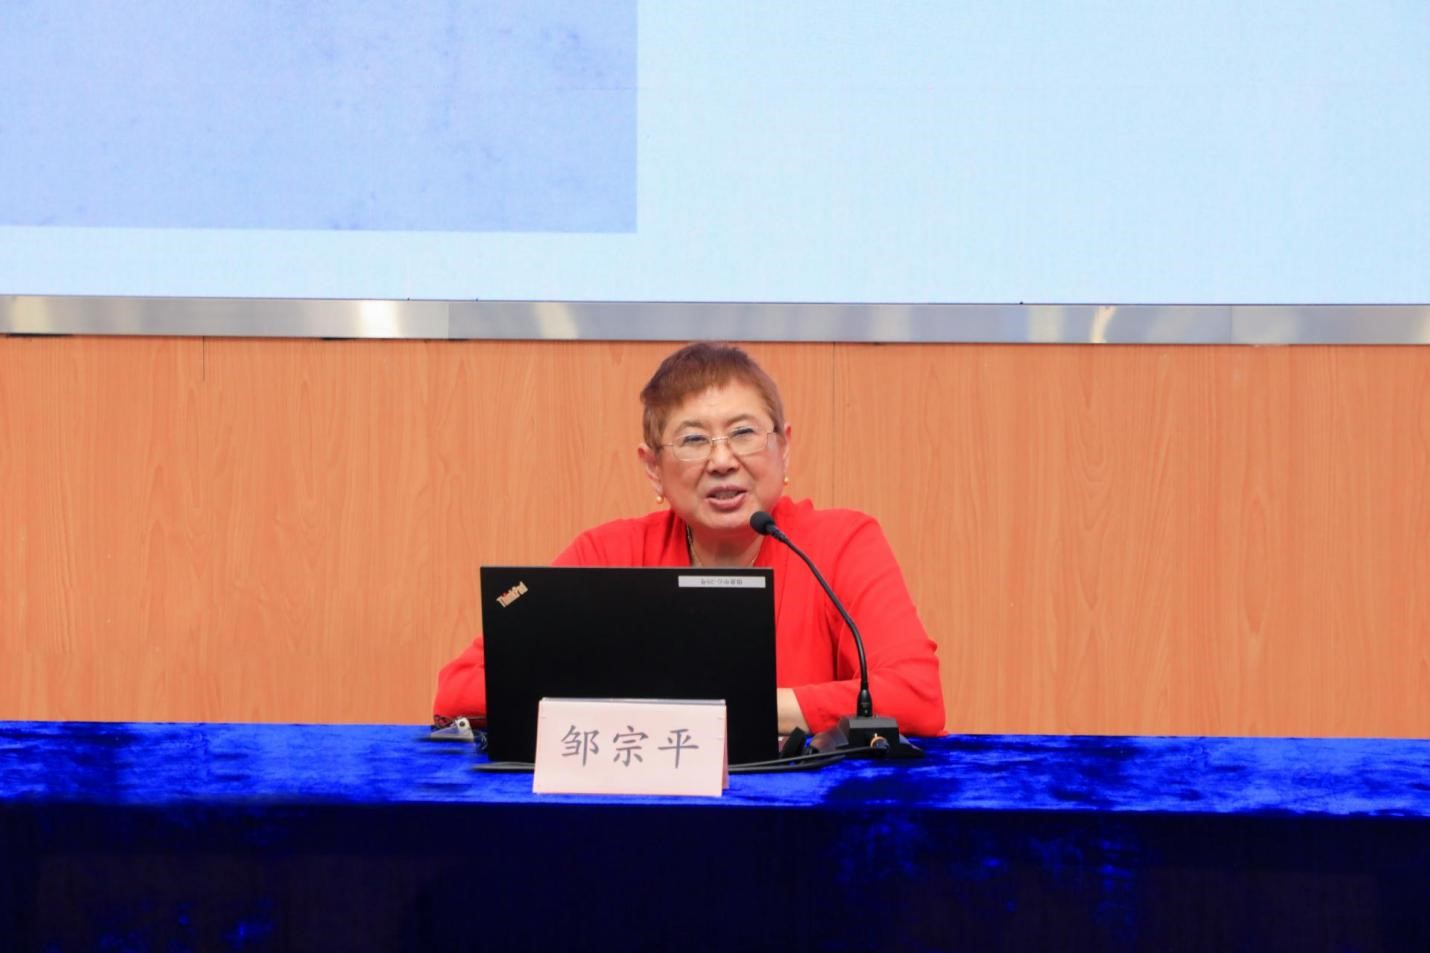 Tsou Tsung-Ping provides insight into Li Siguang’s legacy in advancing science and technology